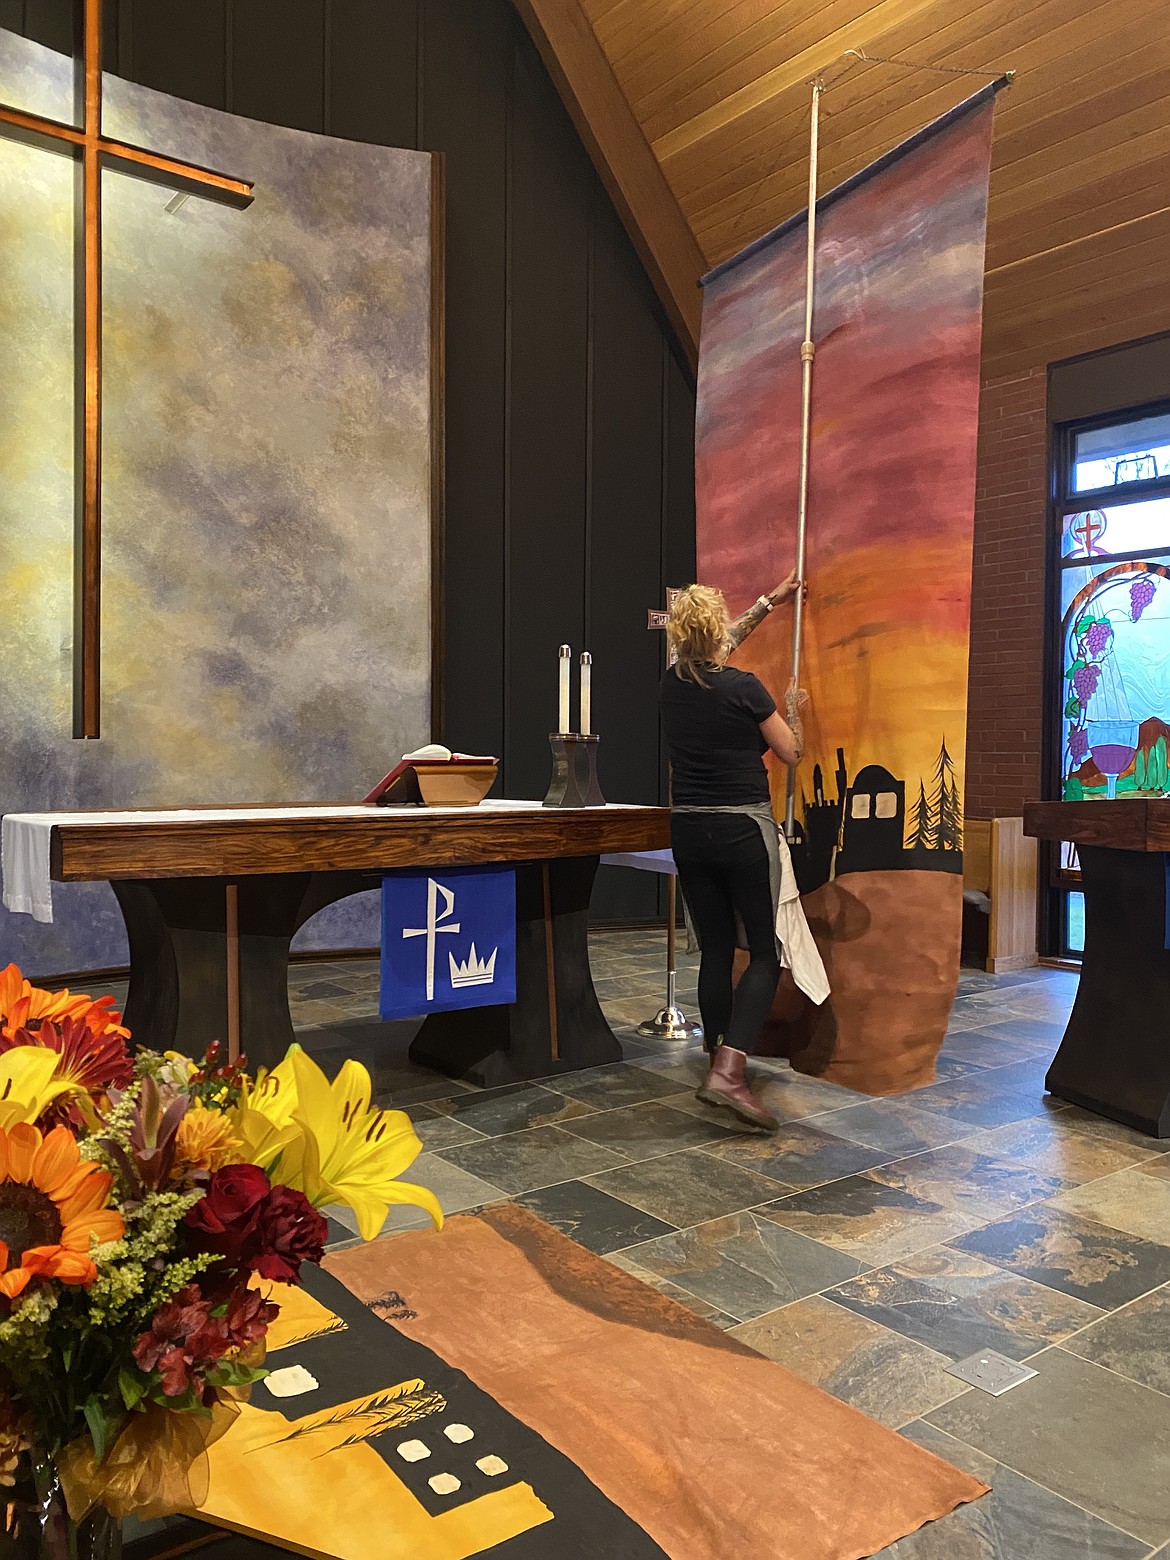 Local artist, Shannon Erwin installs the enormous, hand-painted panels that mark the opening of the Advent season this Sunday.